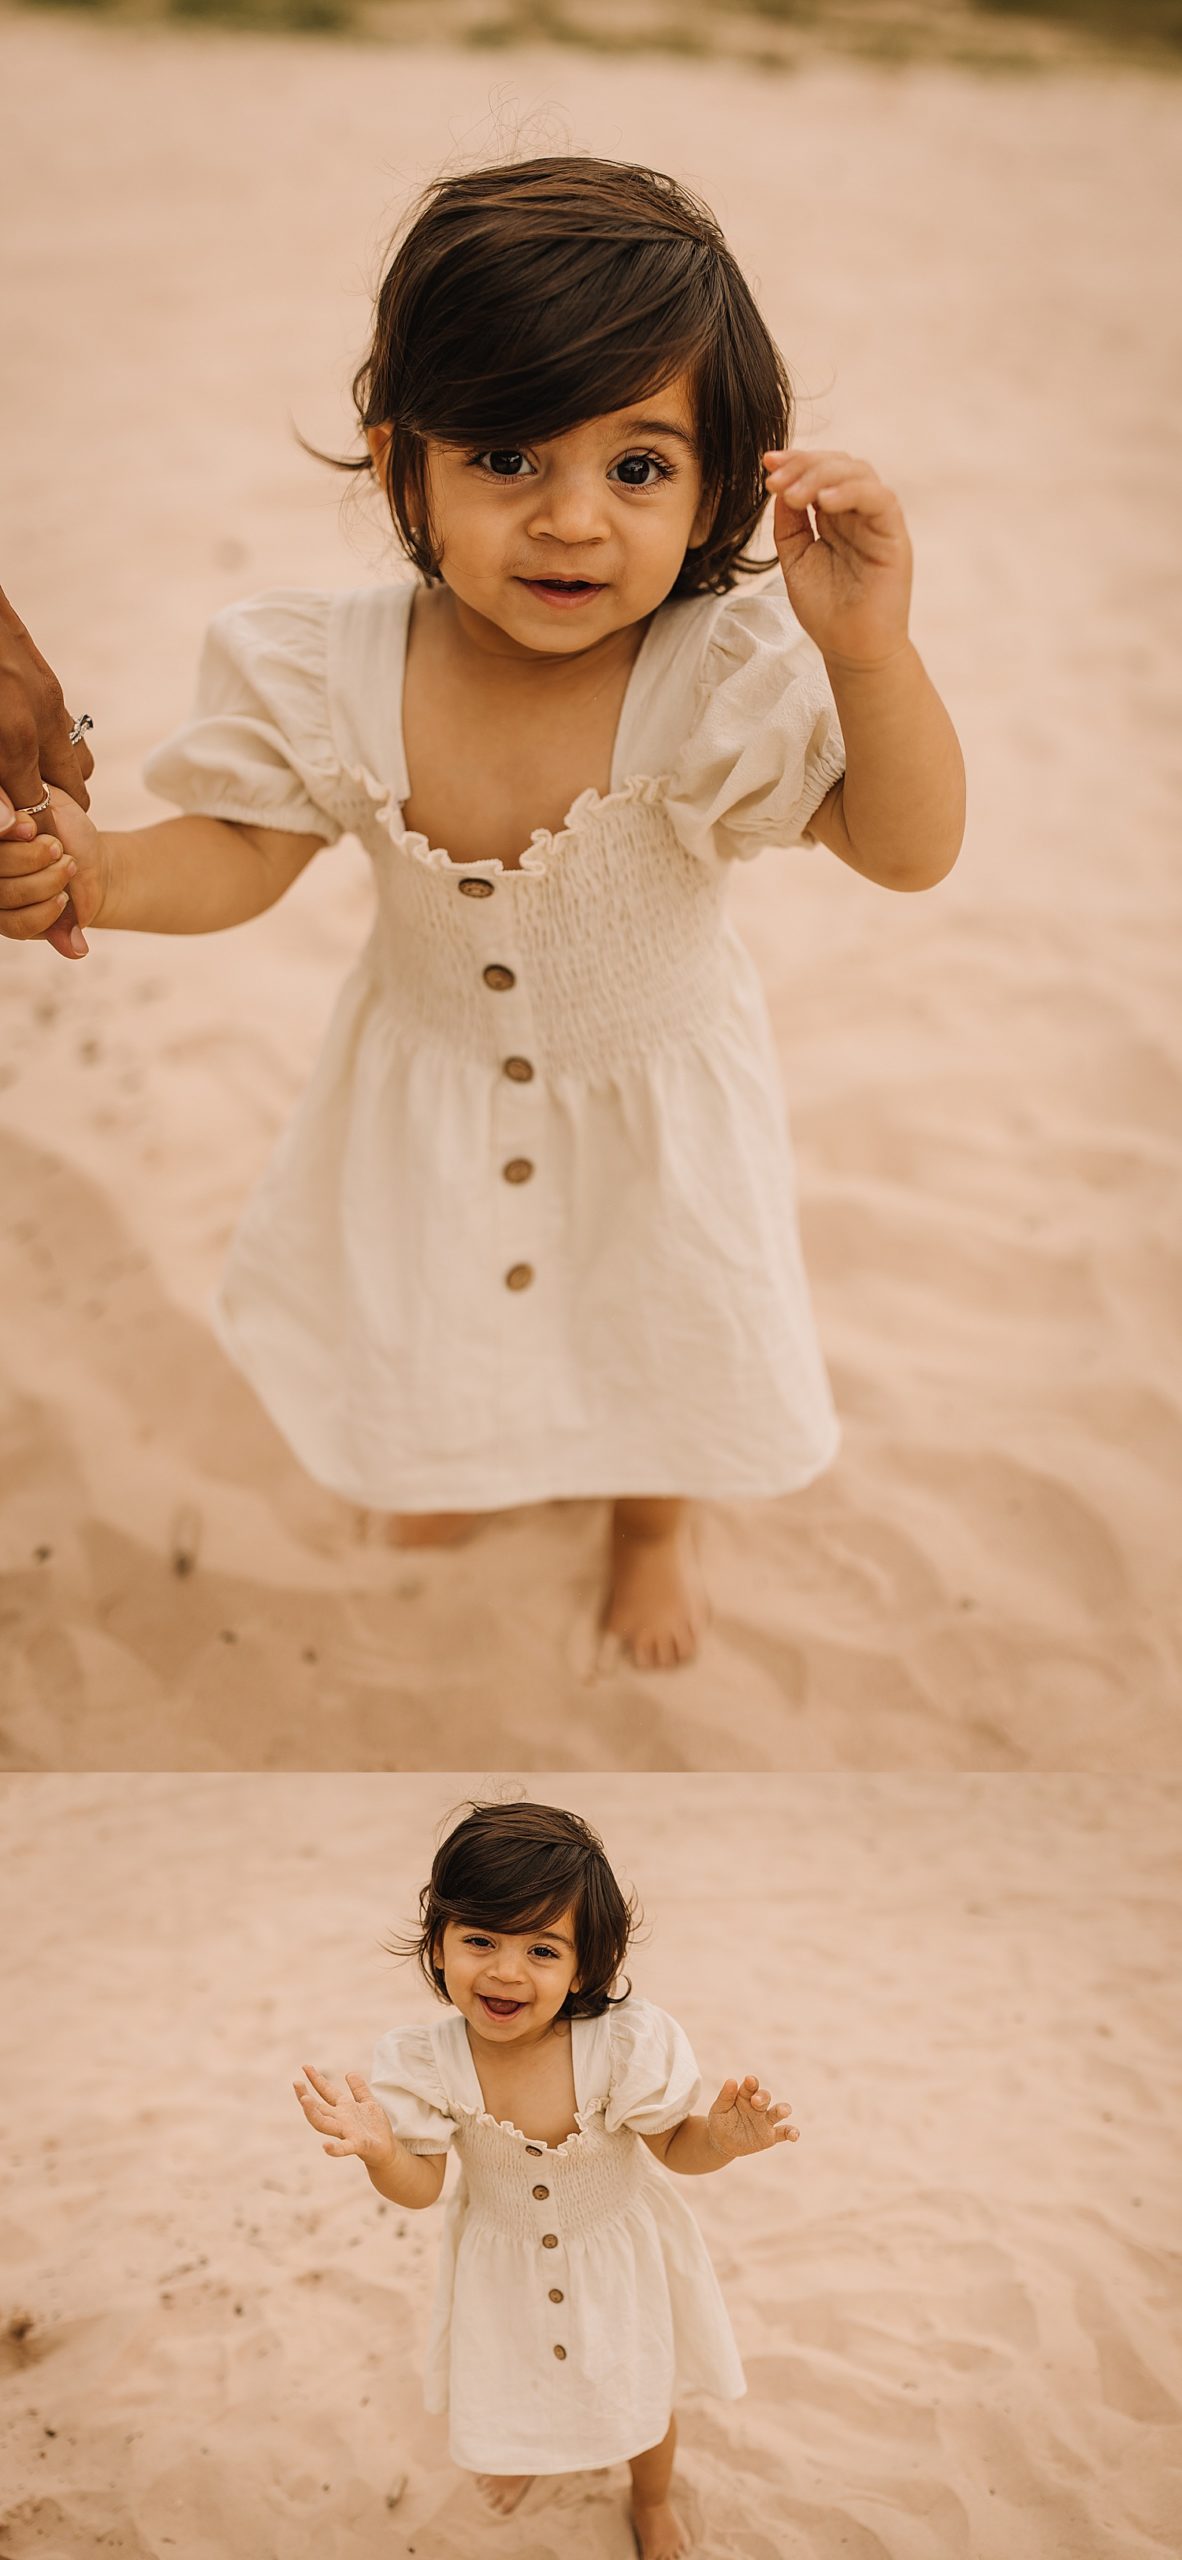 Daughter plays in sand during beach family session wearing button up dress